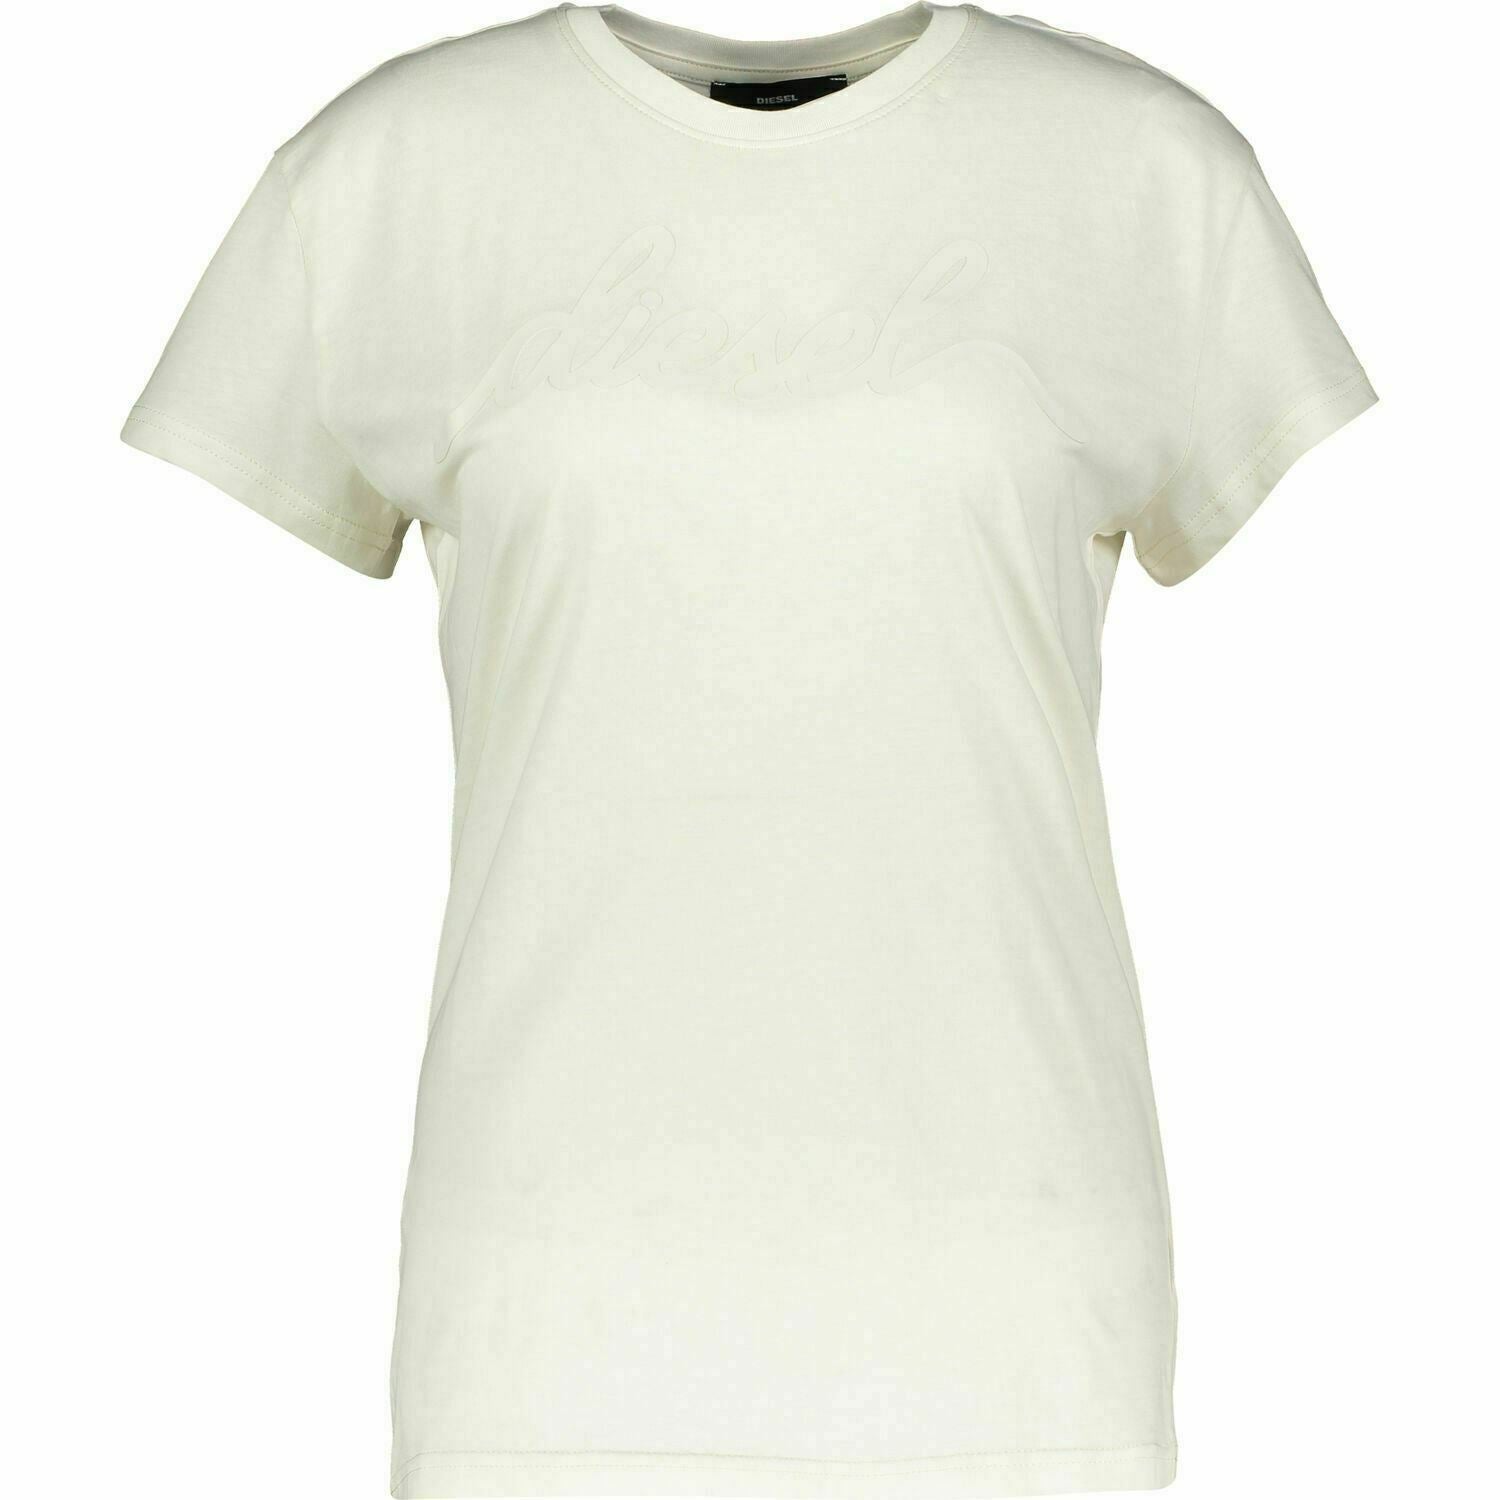 Genuine Diesel Womens Off White Sully T-Shirt Size Large